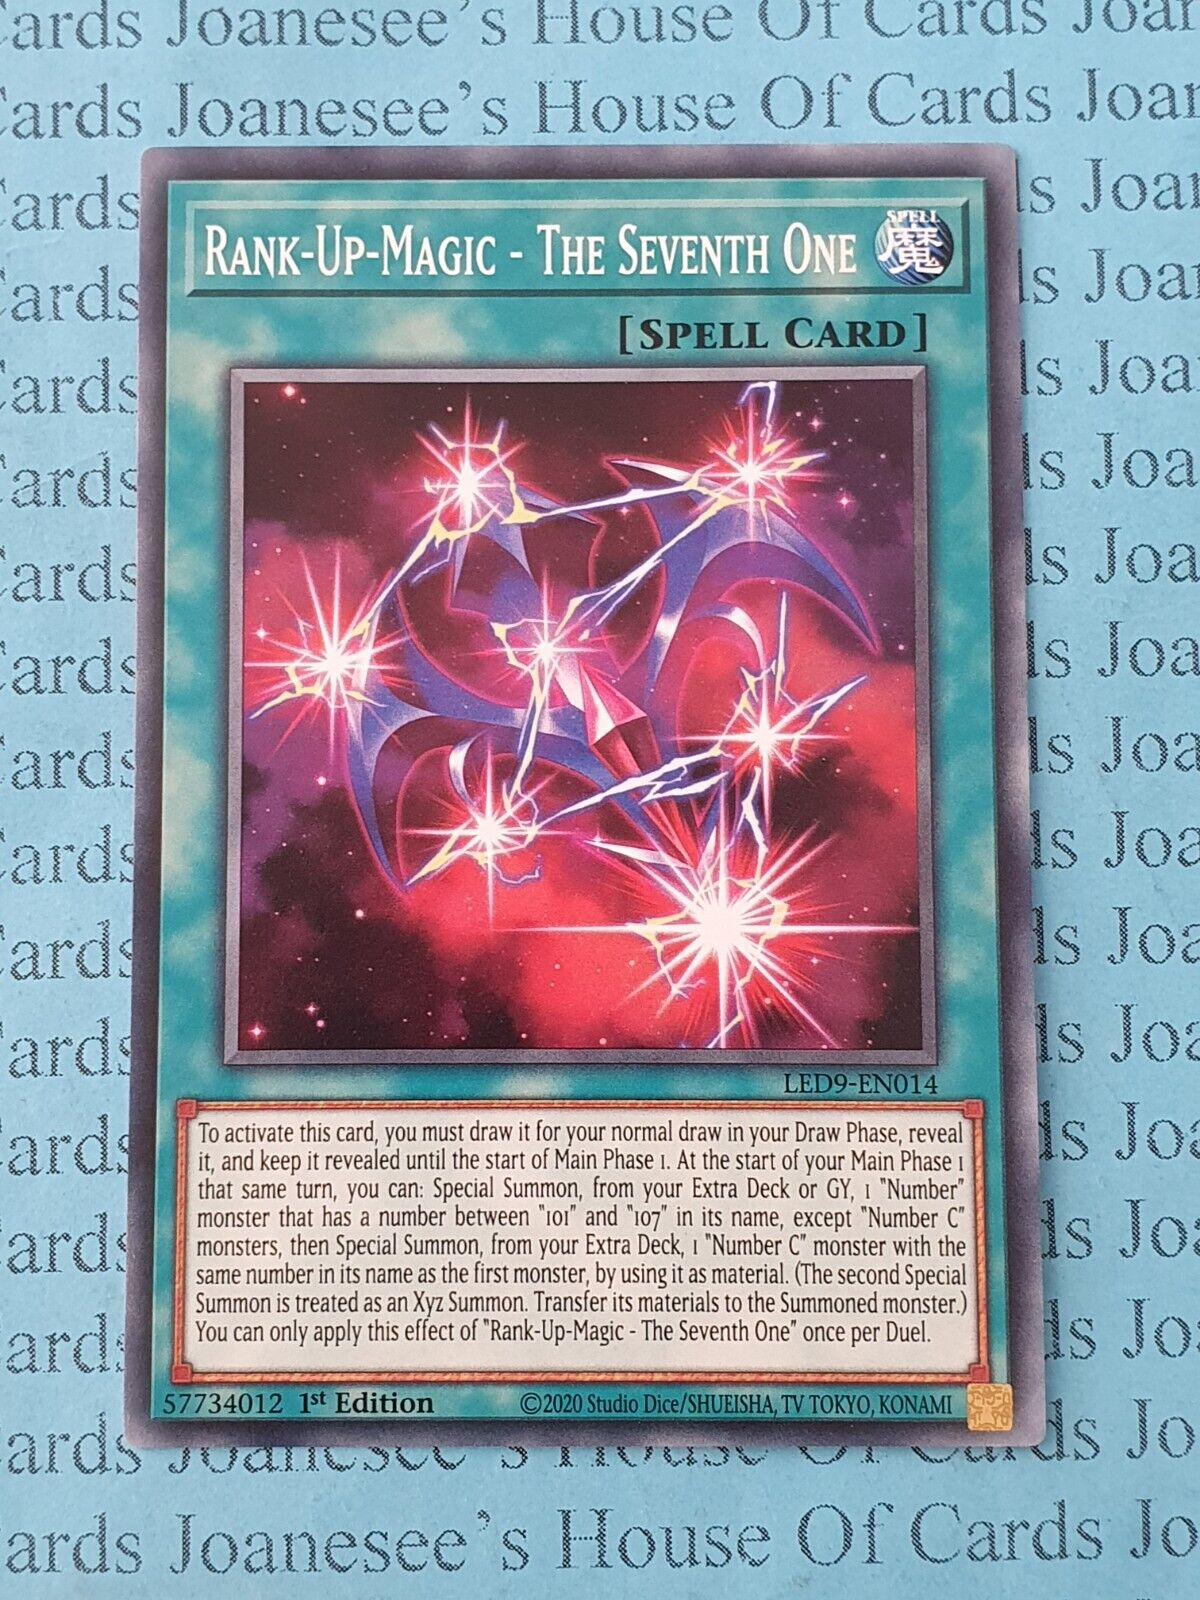 Rank-Up-Magic - The Seventh One LED9-EN014 Yu-Gi-Oh Card 1st Edition New